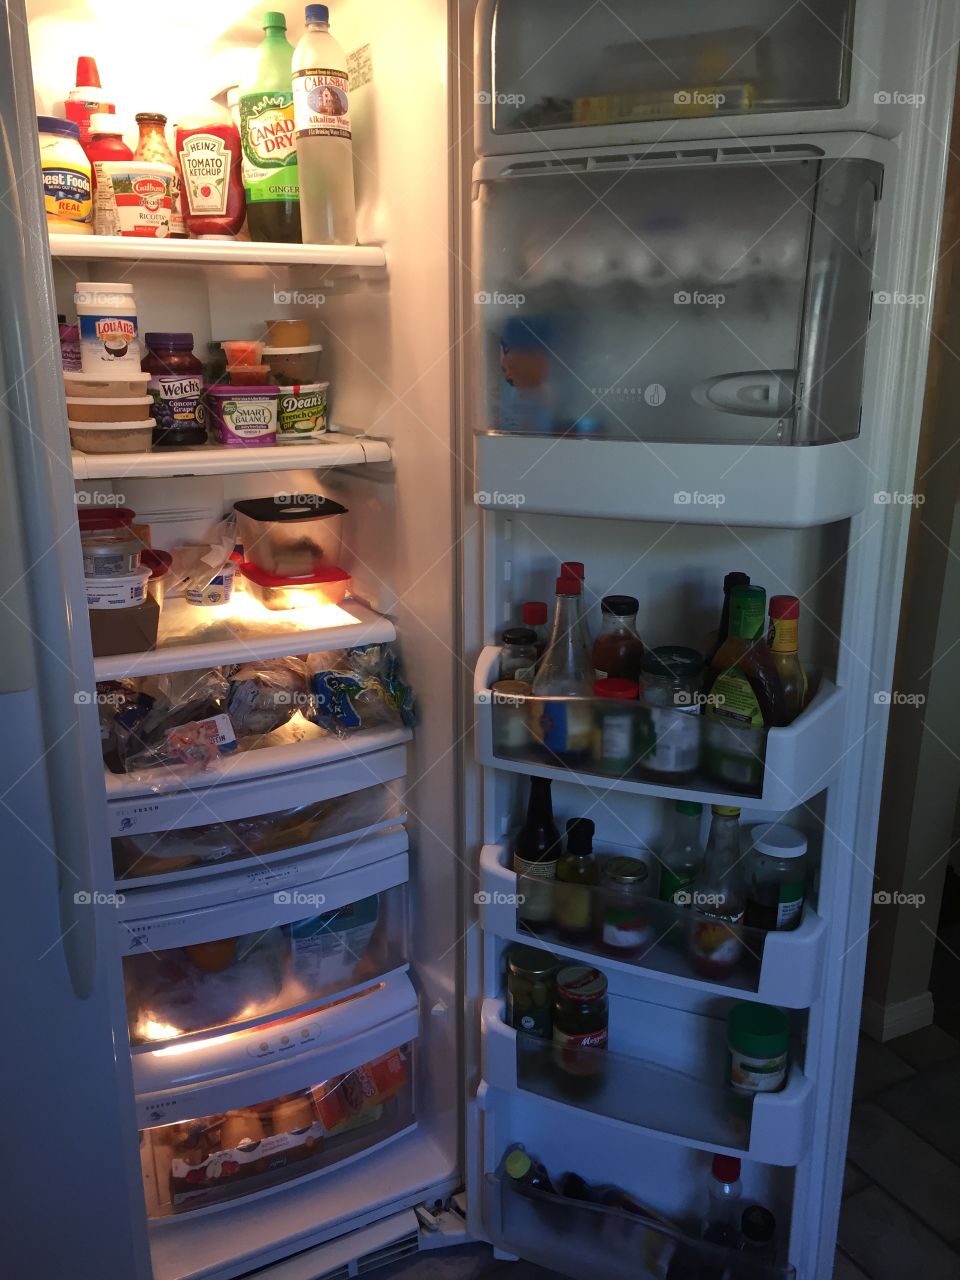 What's in the refrigerator?